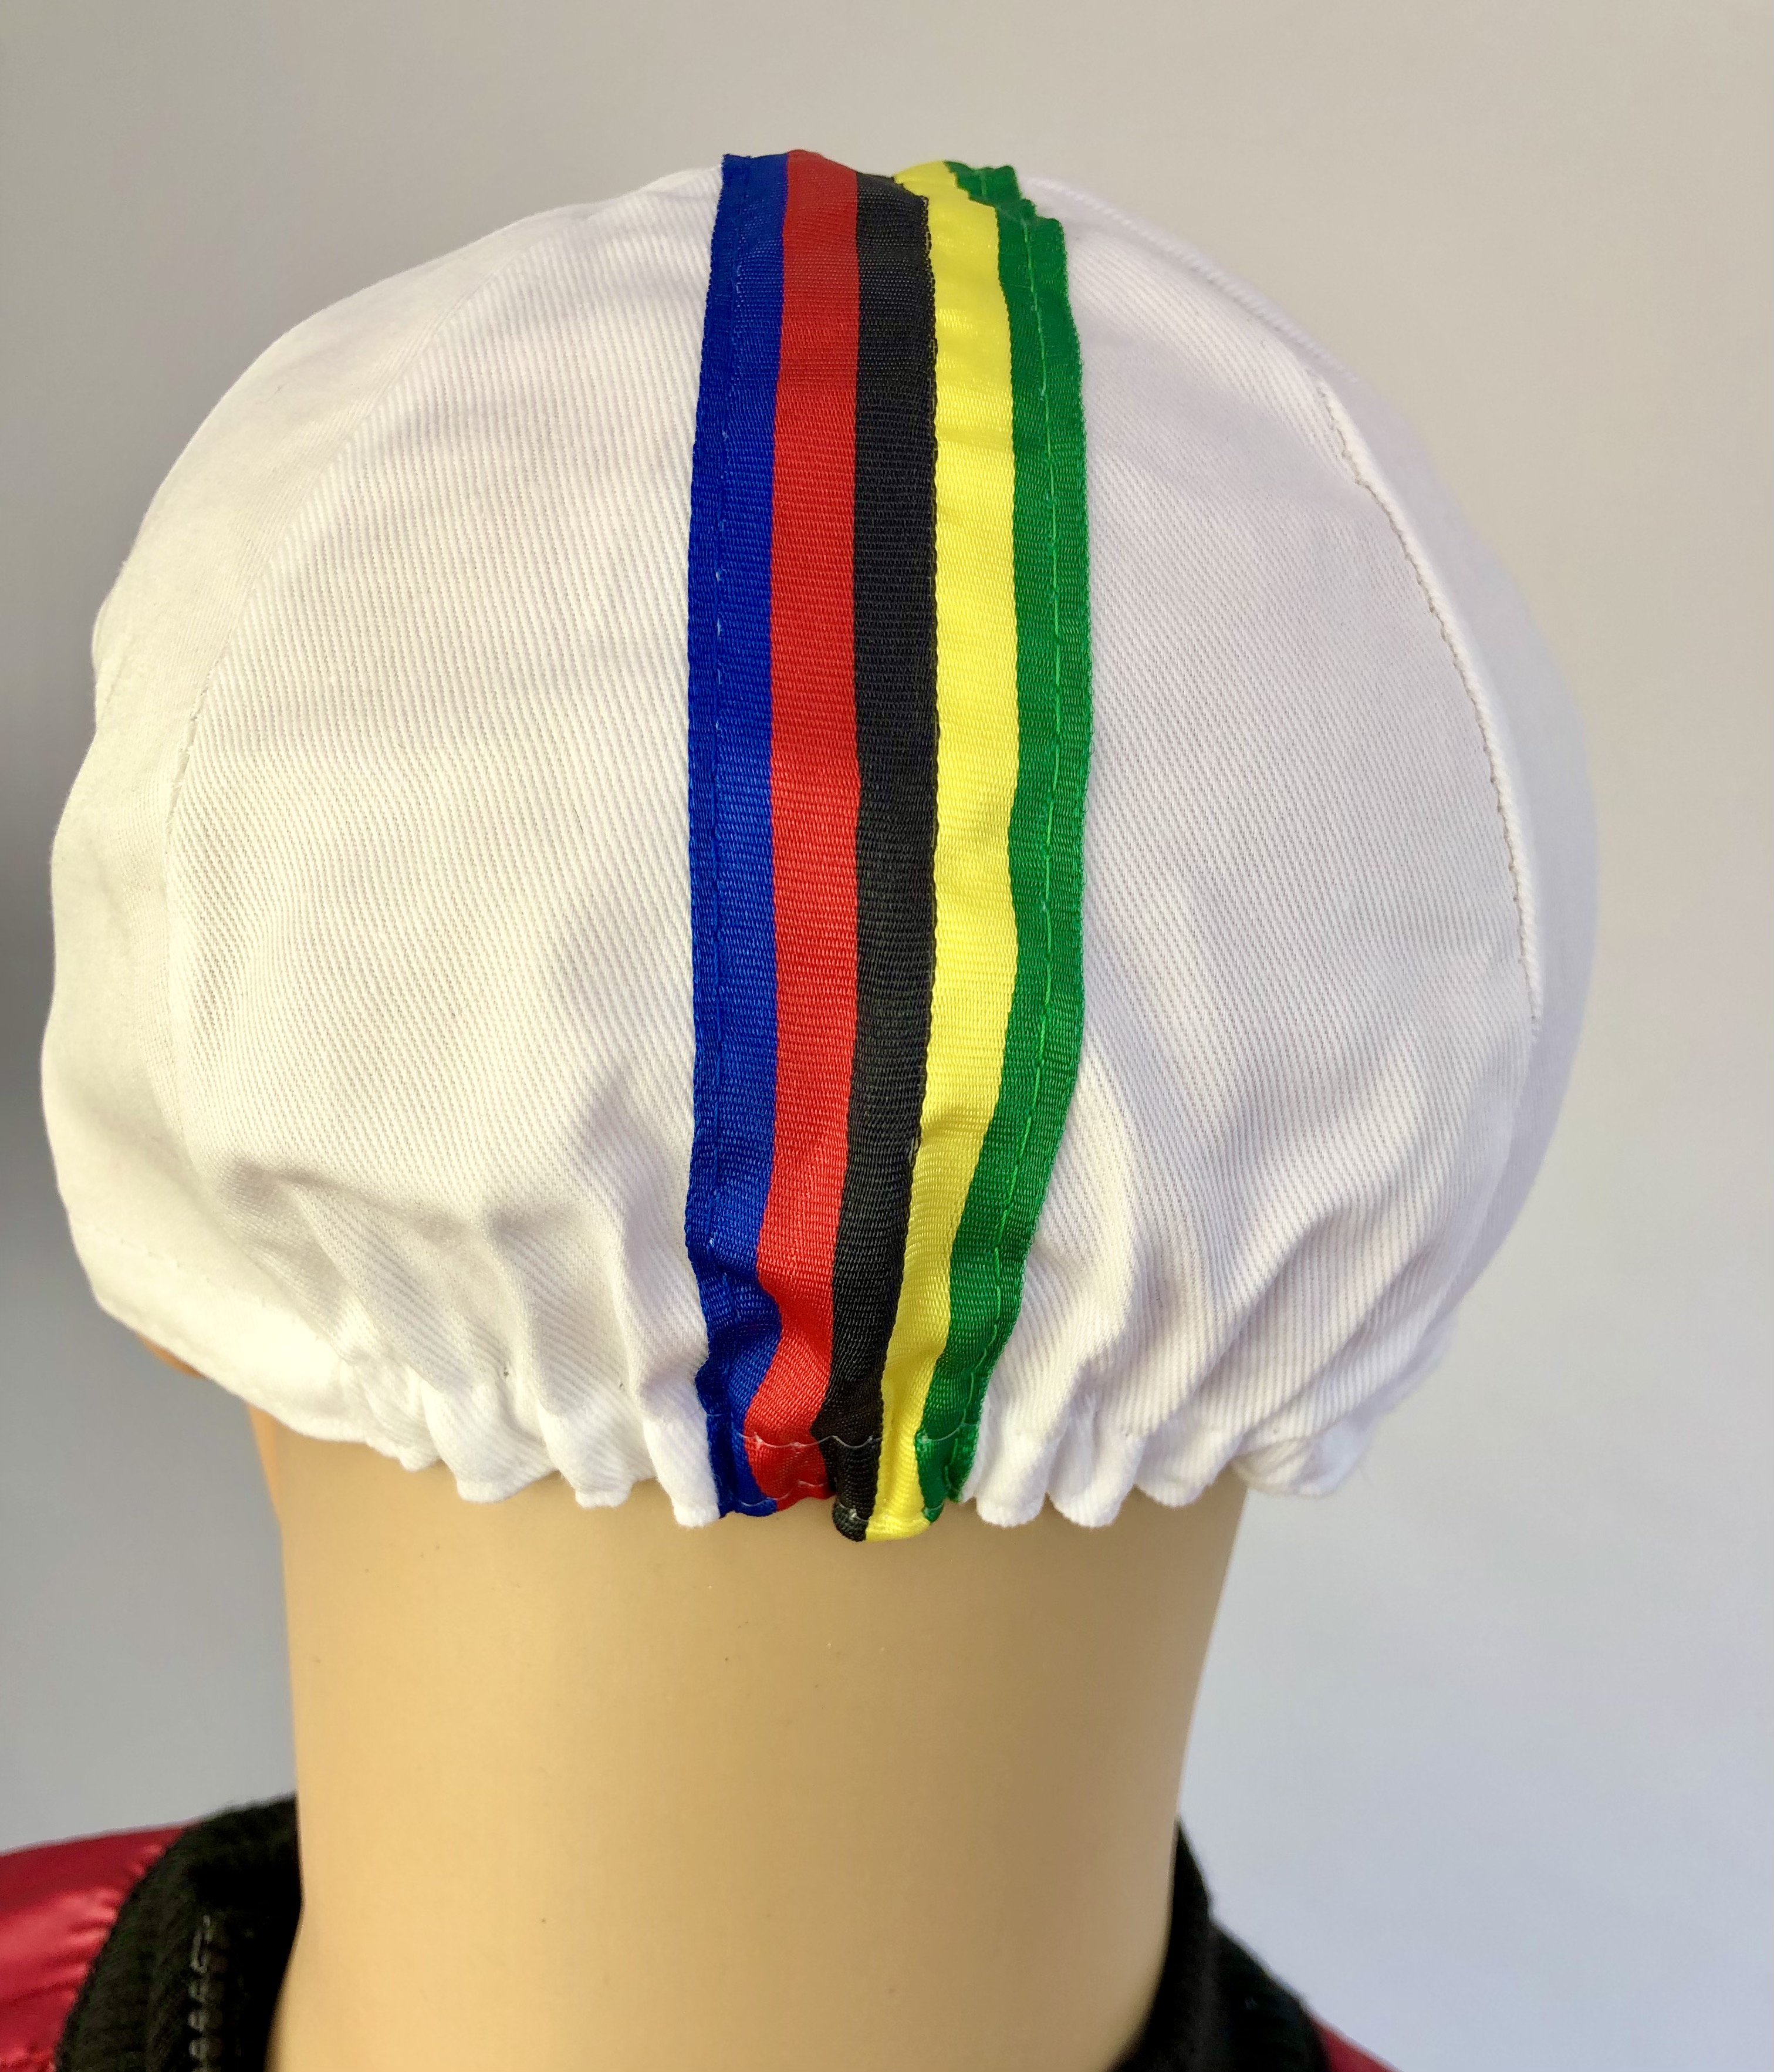 Cycling Cap bianco con strisce colorate